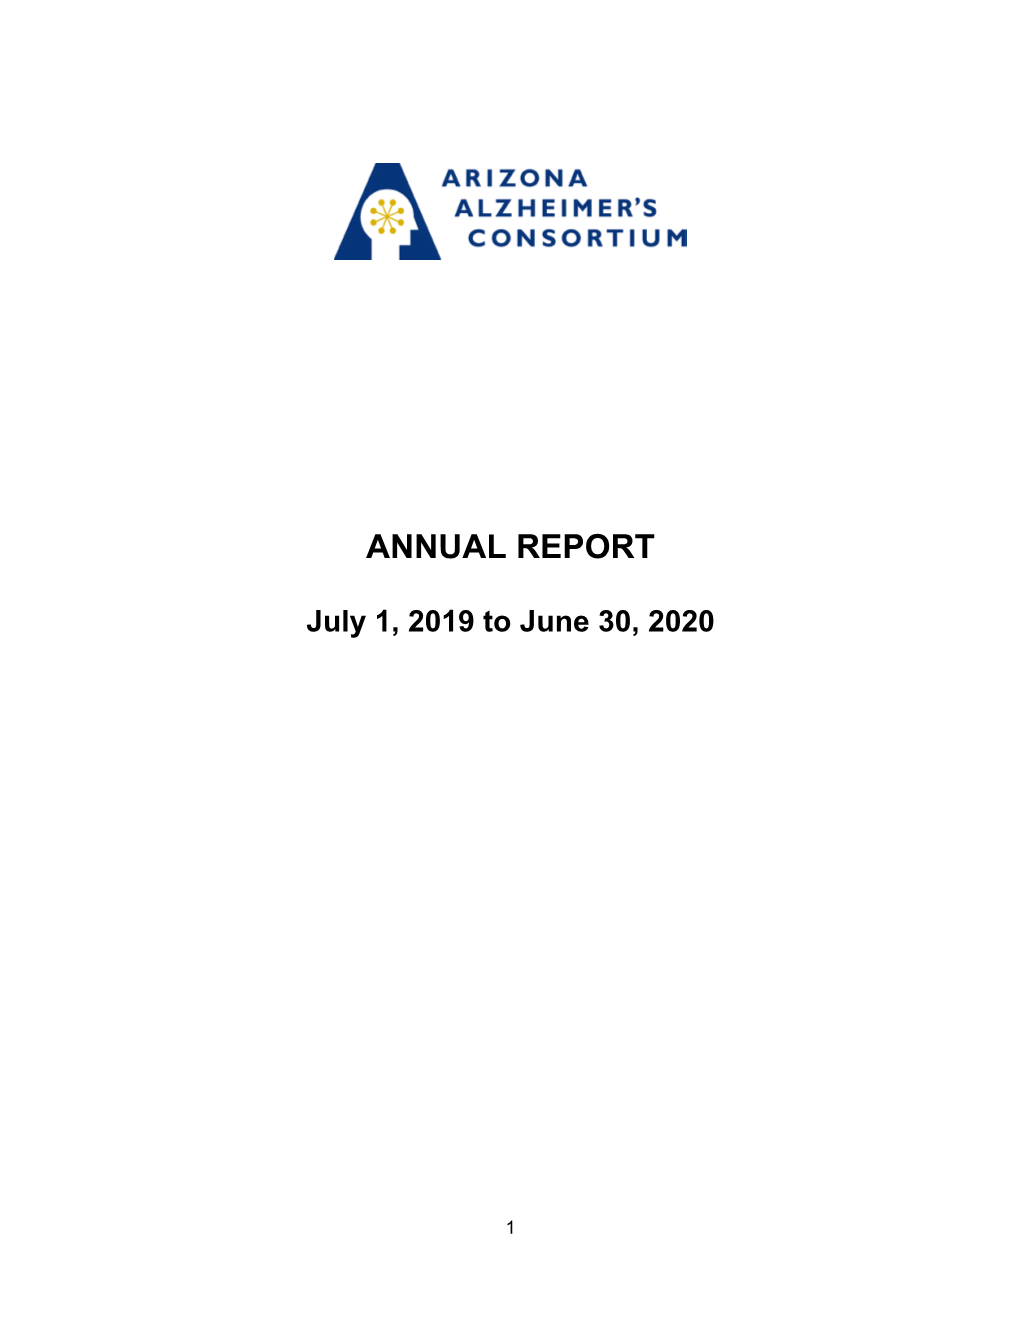 To Download the AAC Annual Report